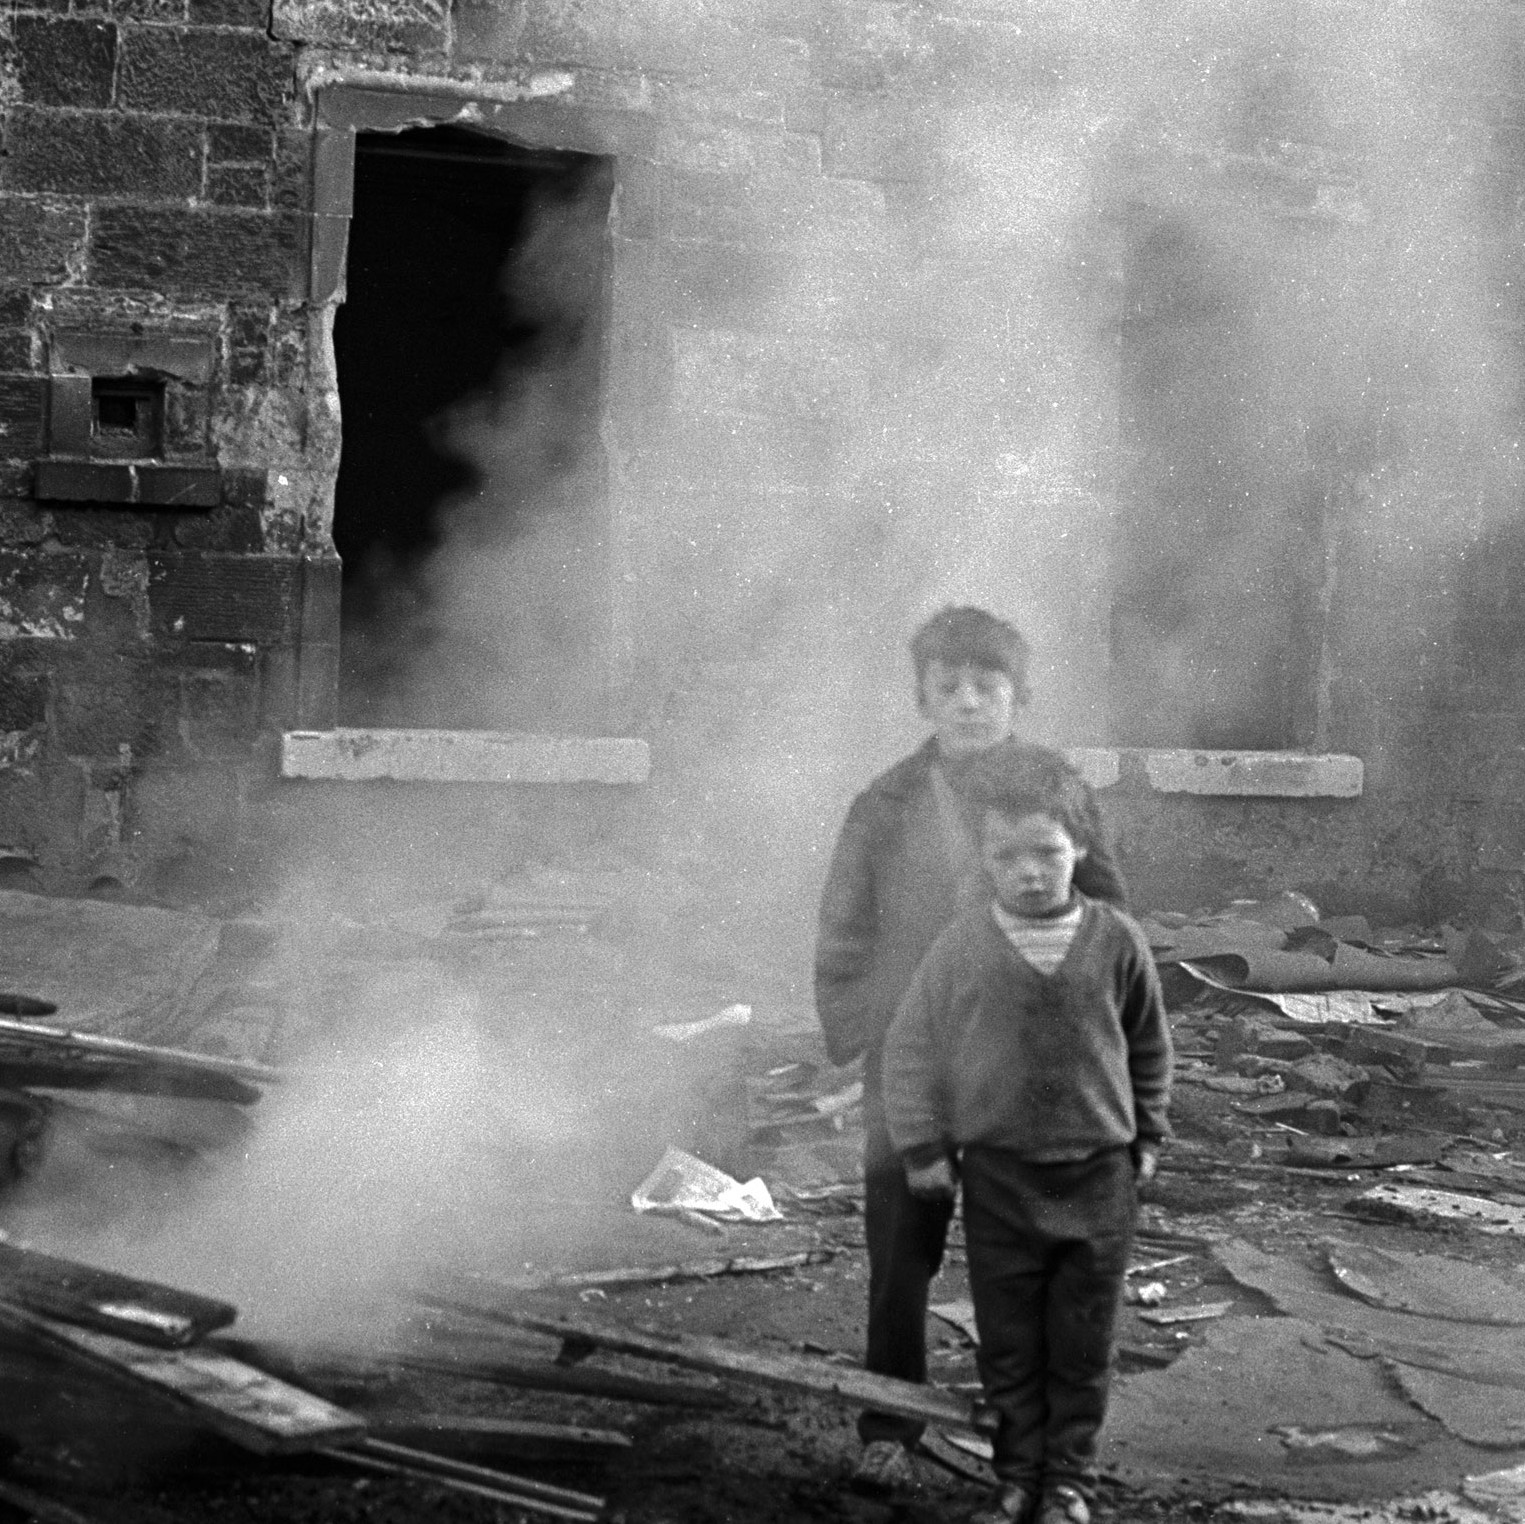 Image of  Untitled, from 'Glasgow 1974' (Two Young Boys in Smoke) by Hugh Hood